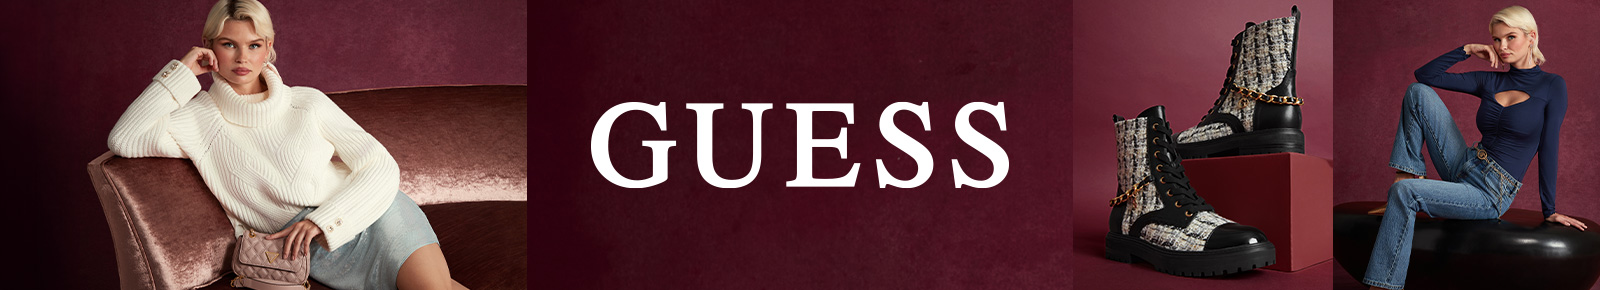 Guess | Handbags, Watches & Clothing | Afterpay | MYER